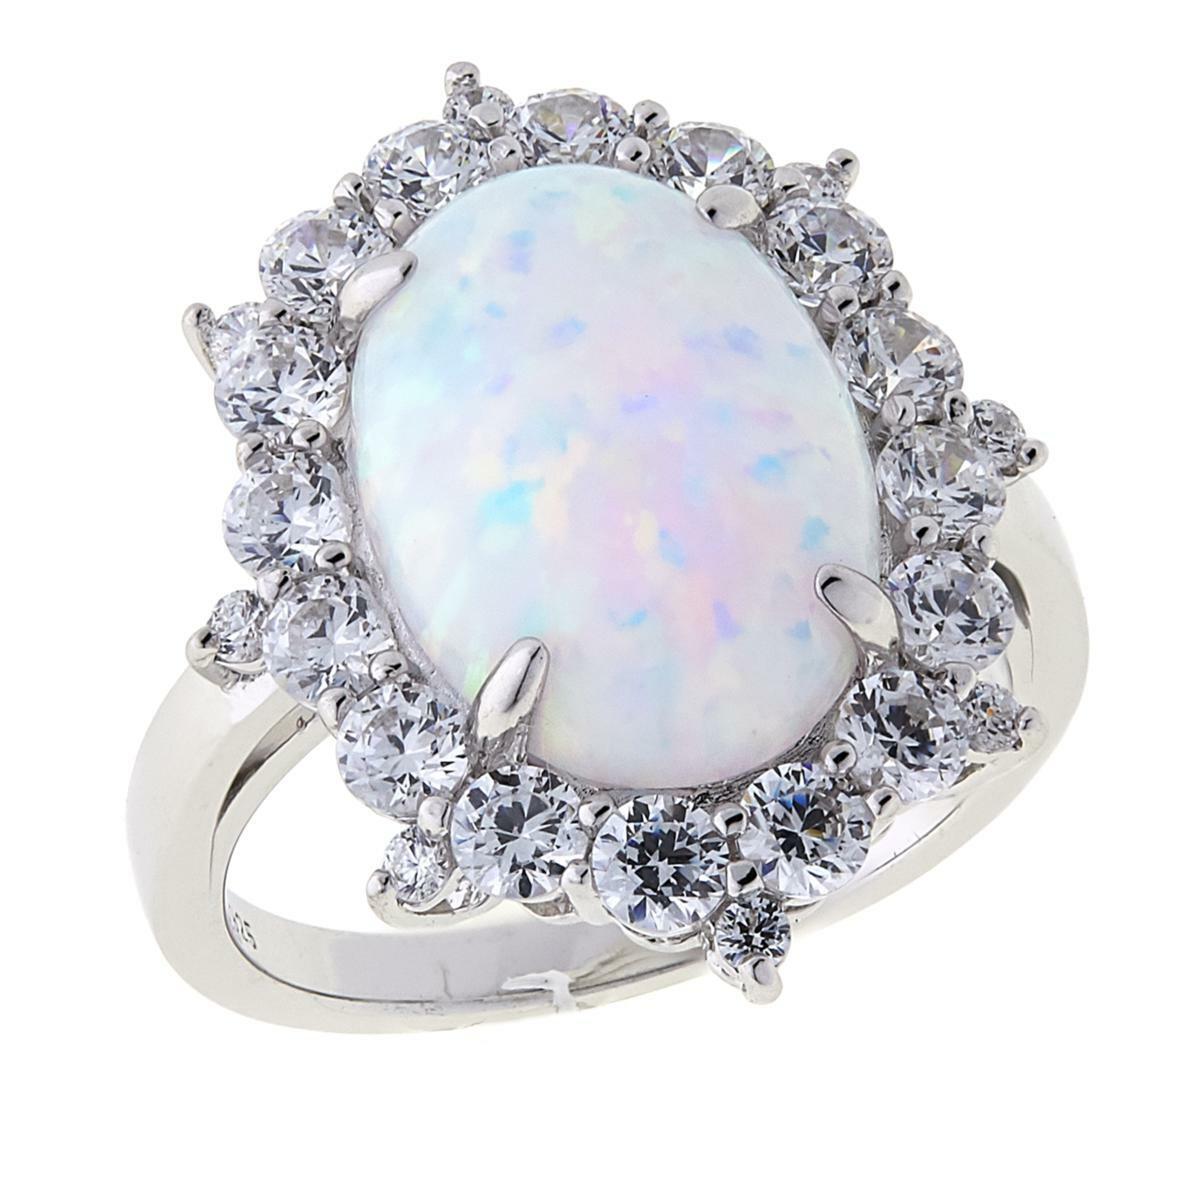 Absolute Synthetic Opal And Cz Sterling Silver Frame Ring Size 5 Hsn $75